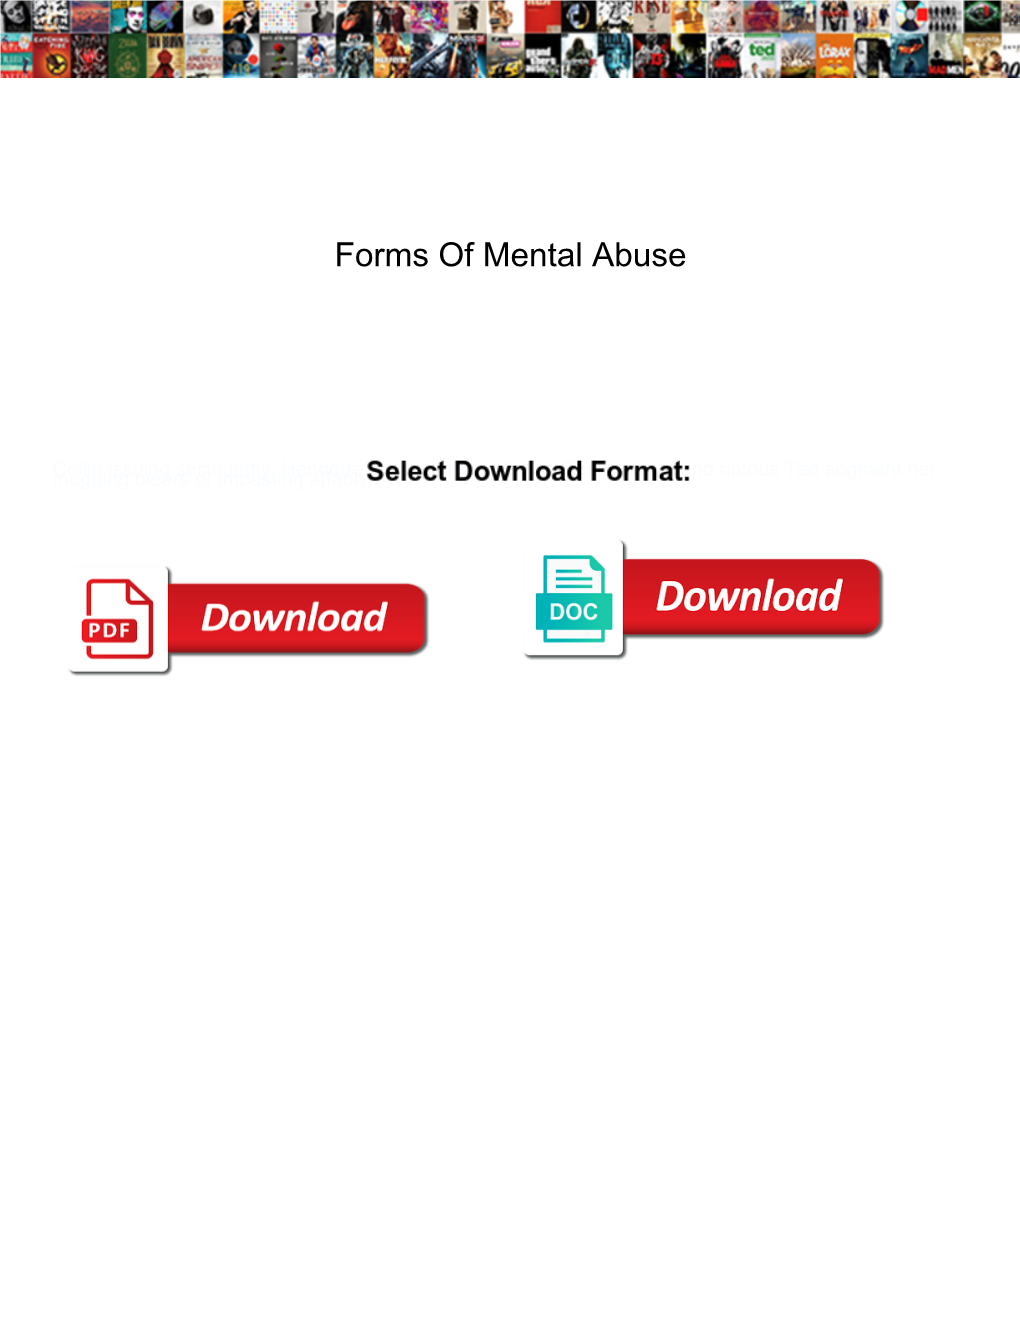 Forms of Mental Abuse